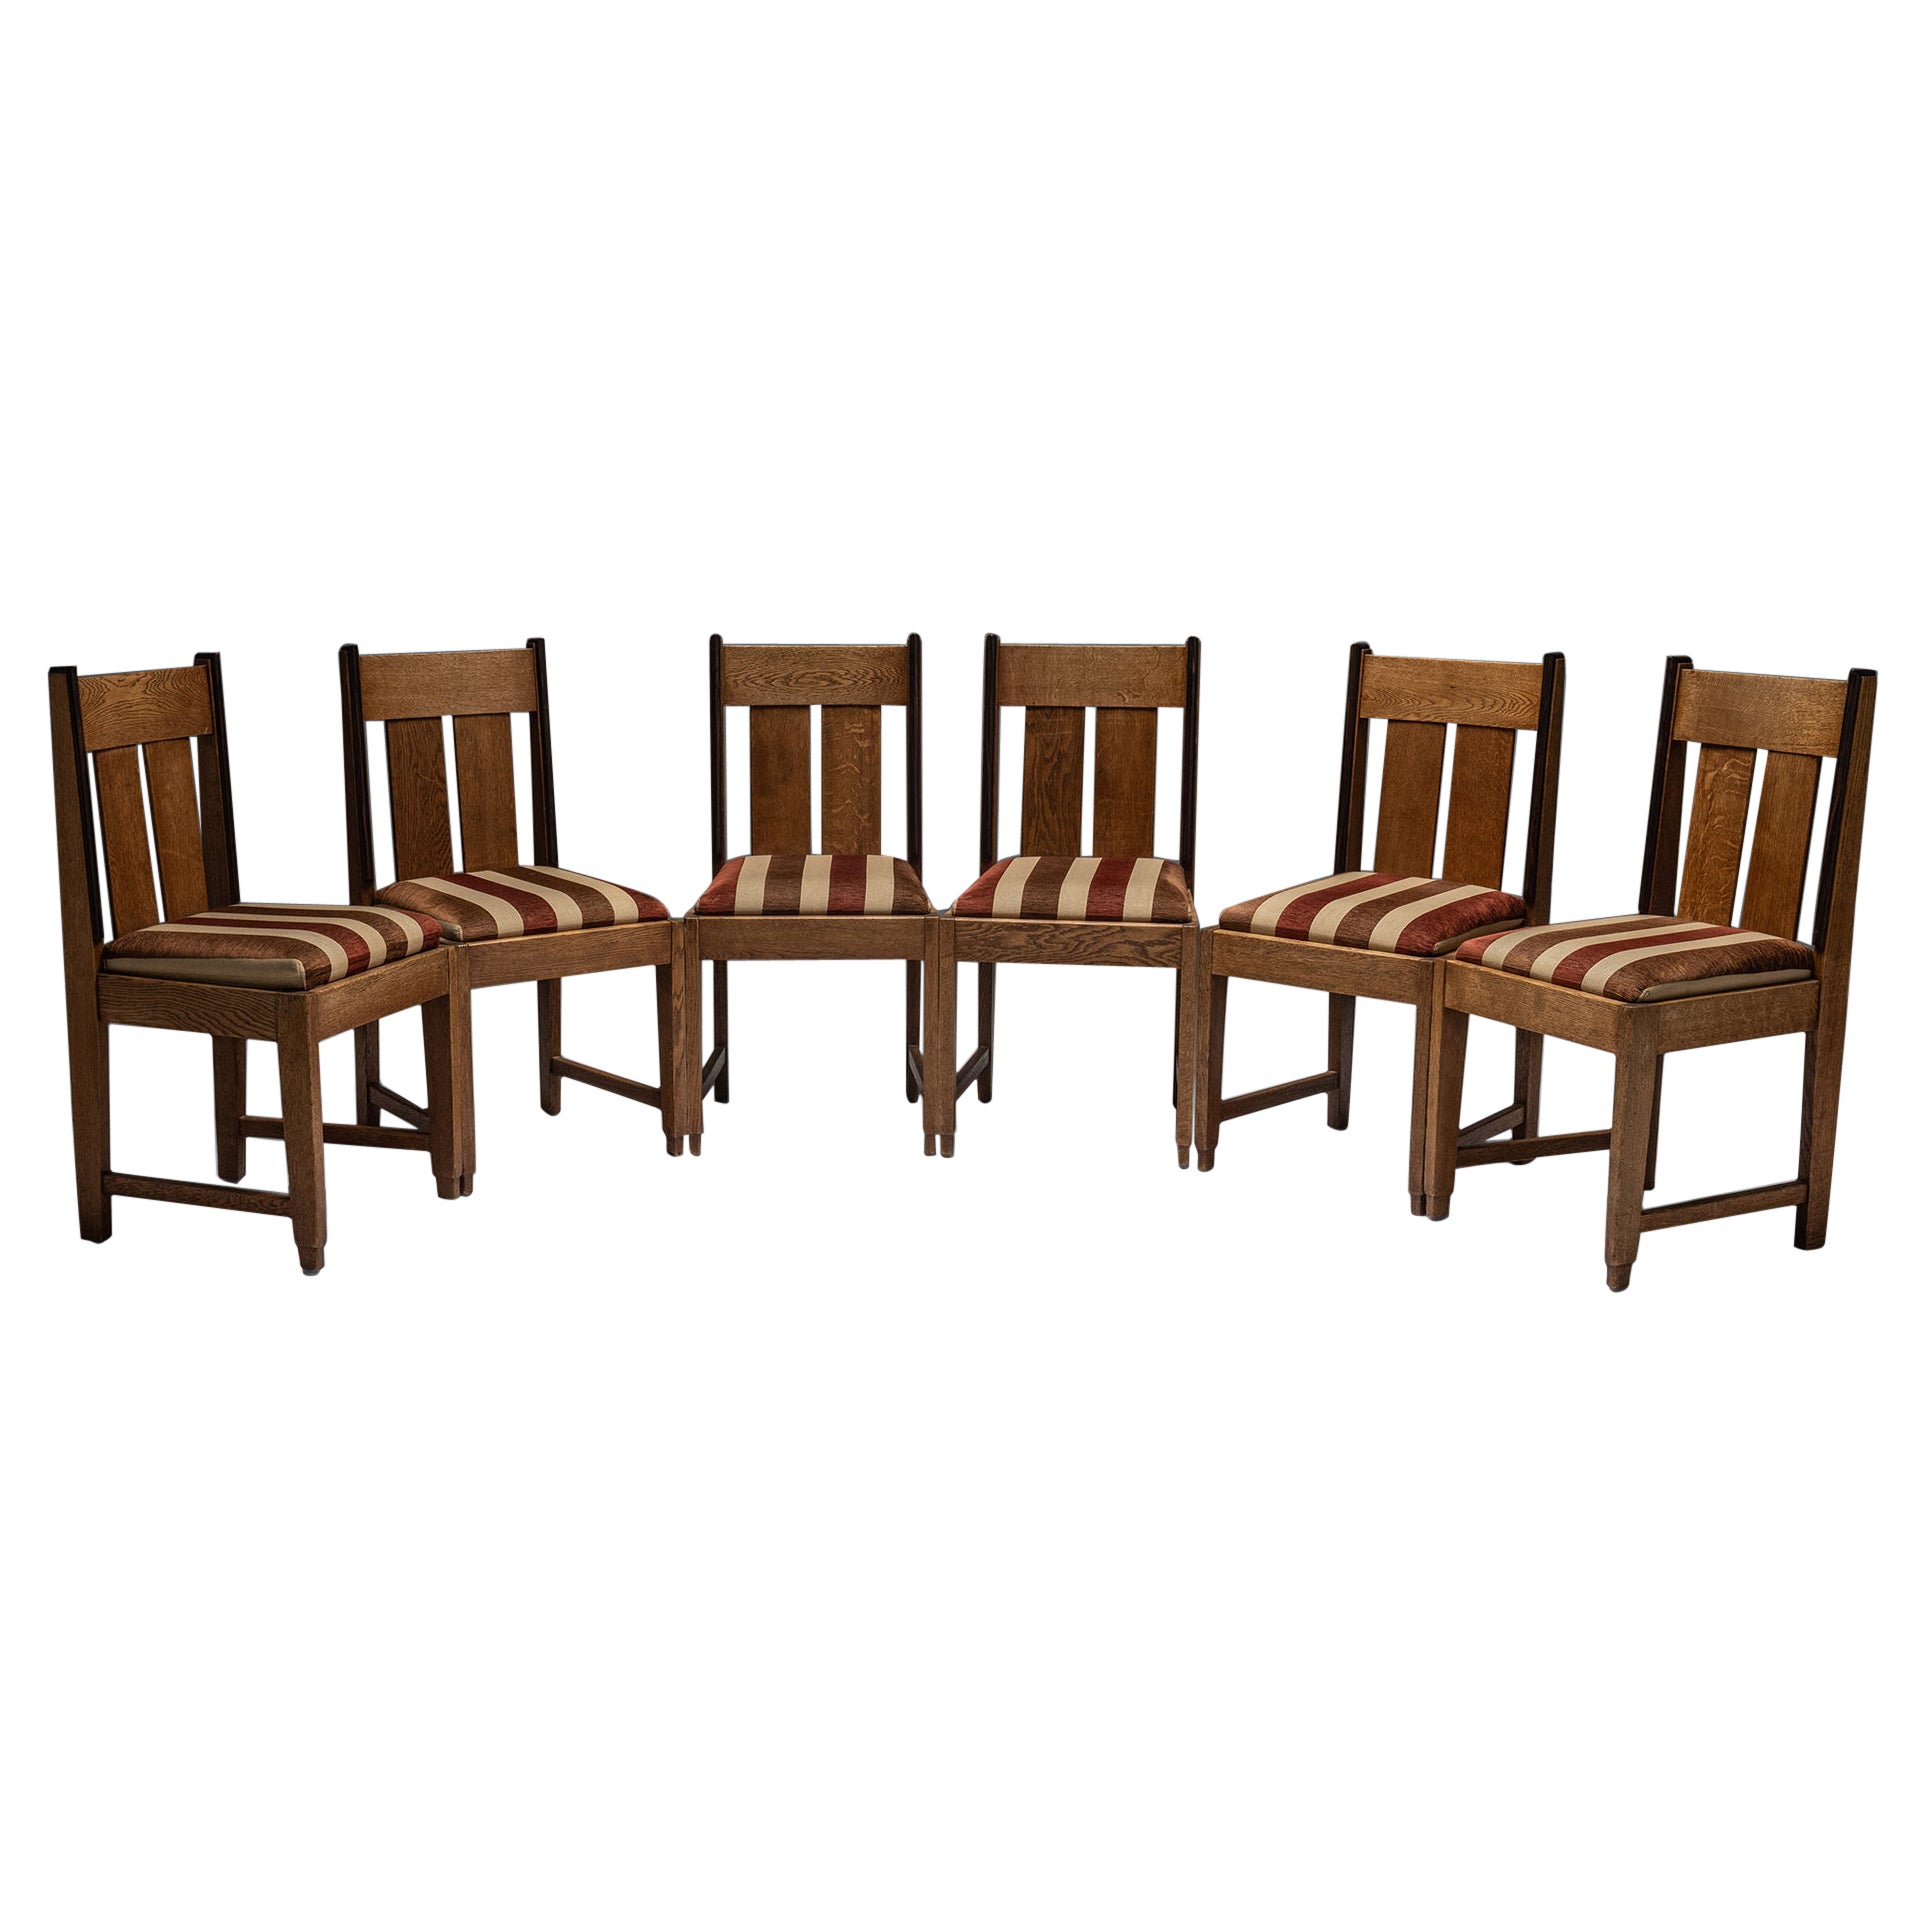 Set of '6' Art Deco Dining Chairs, Netherlands, Circa 1930